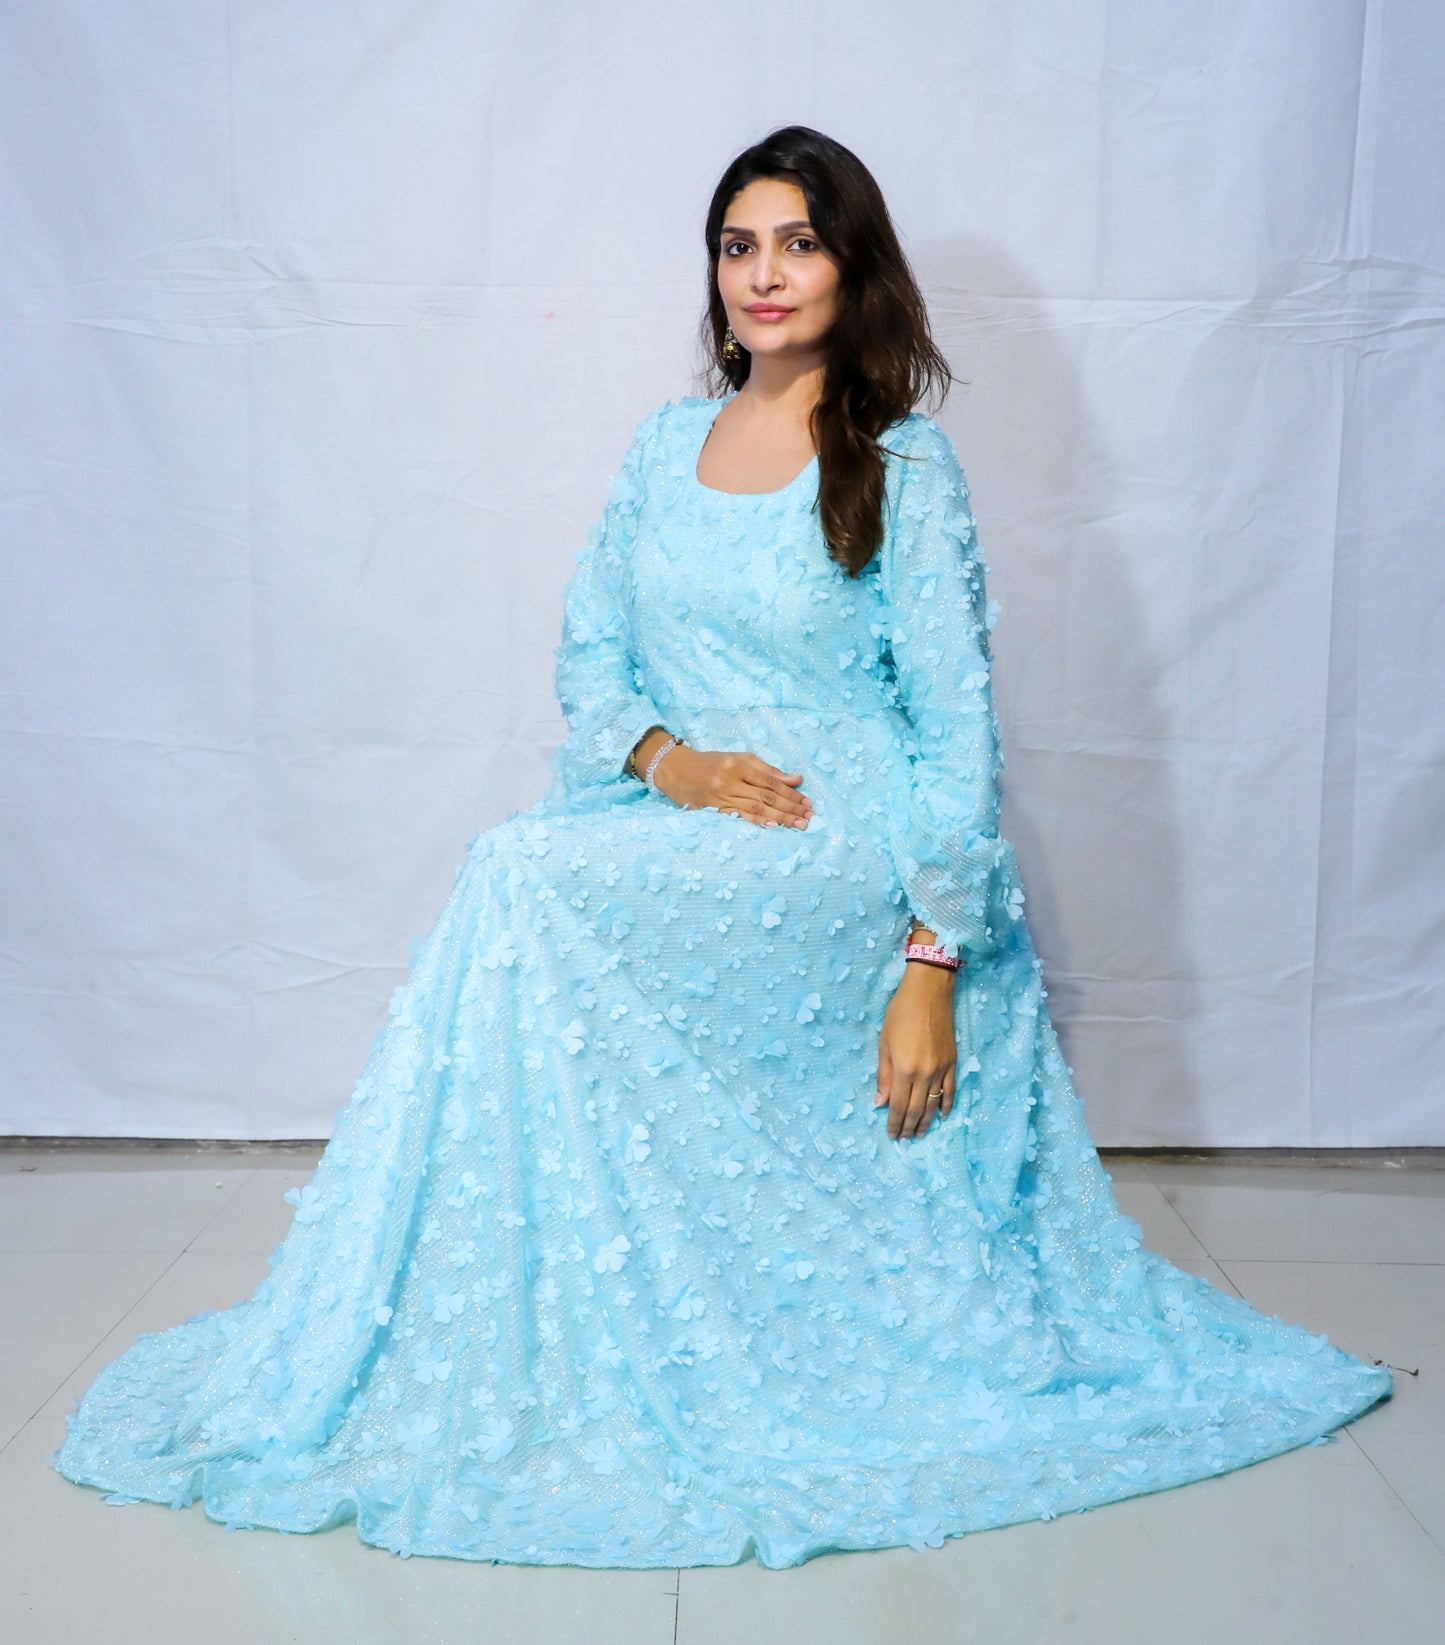 MKG5 FLORAL-DOLL BLUE GOWN